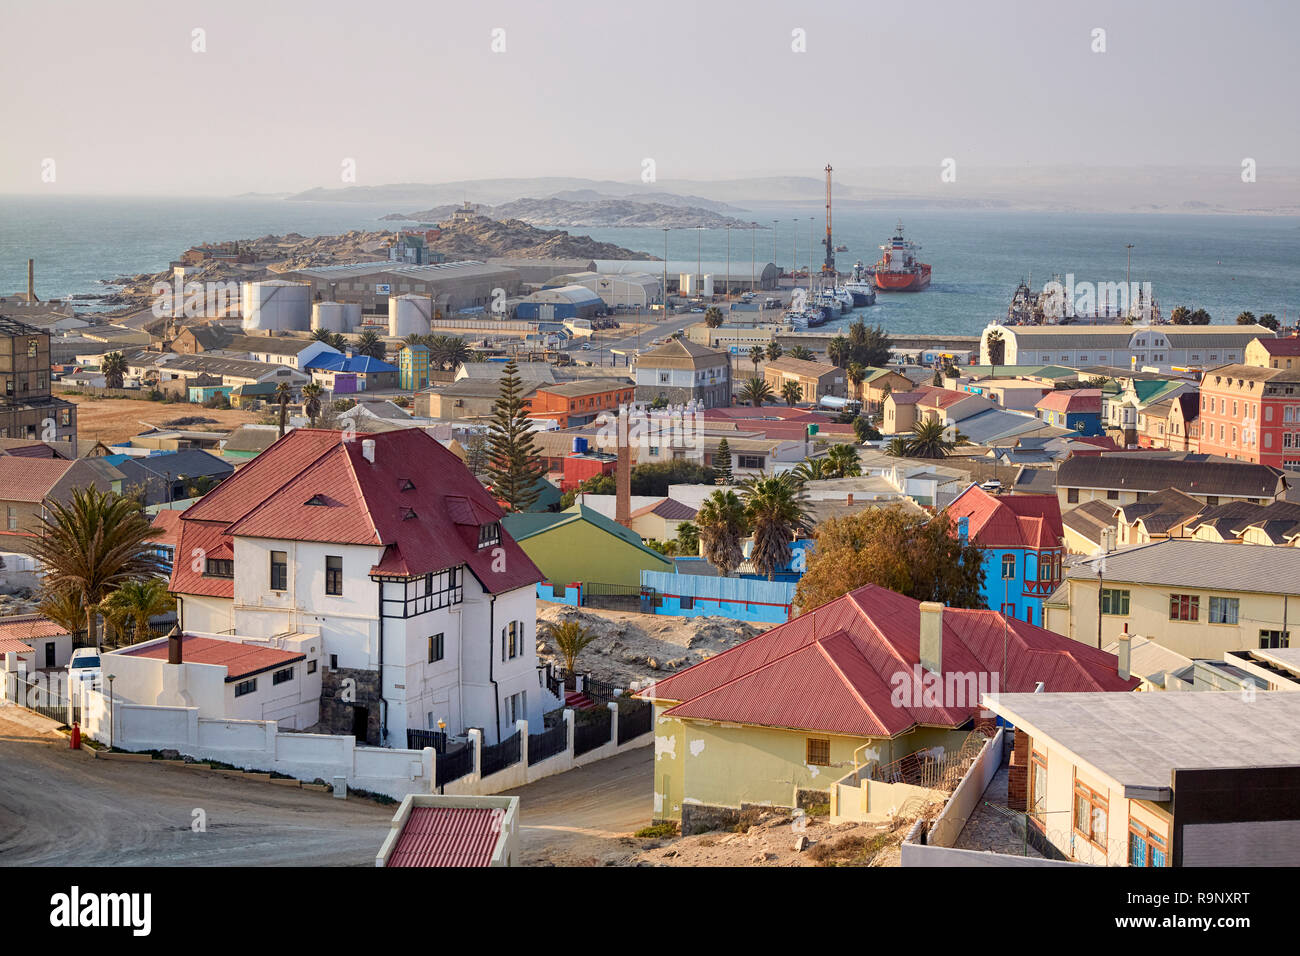 Aerial view of Luderitz showing colorful houses and the port in Namibia, Africa Stock Photo